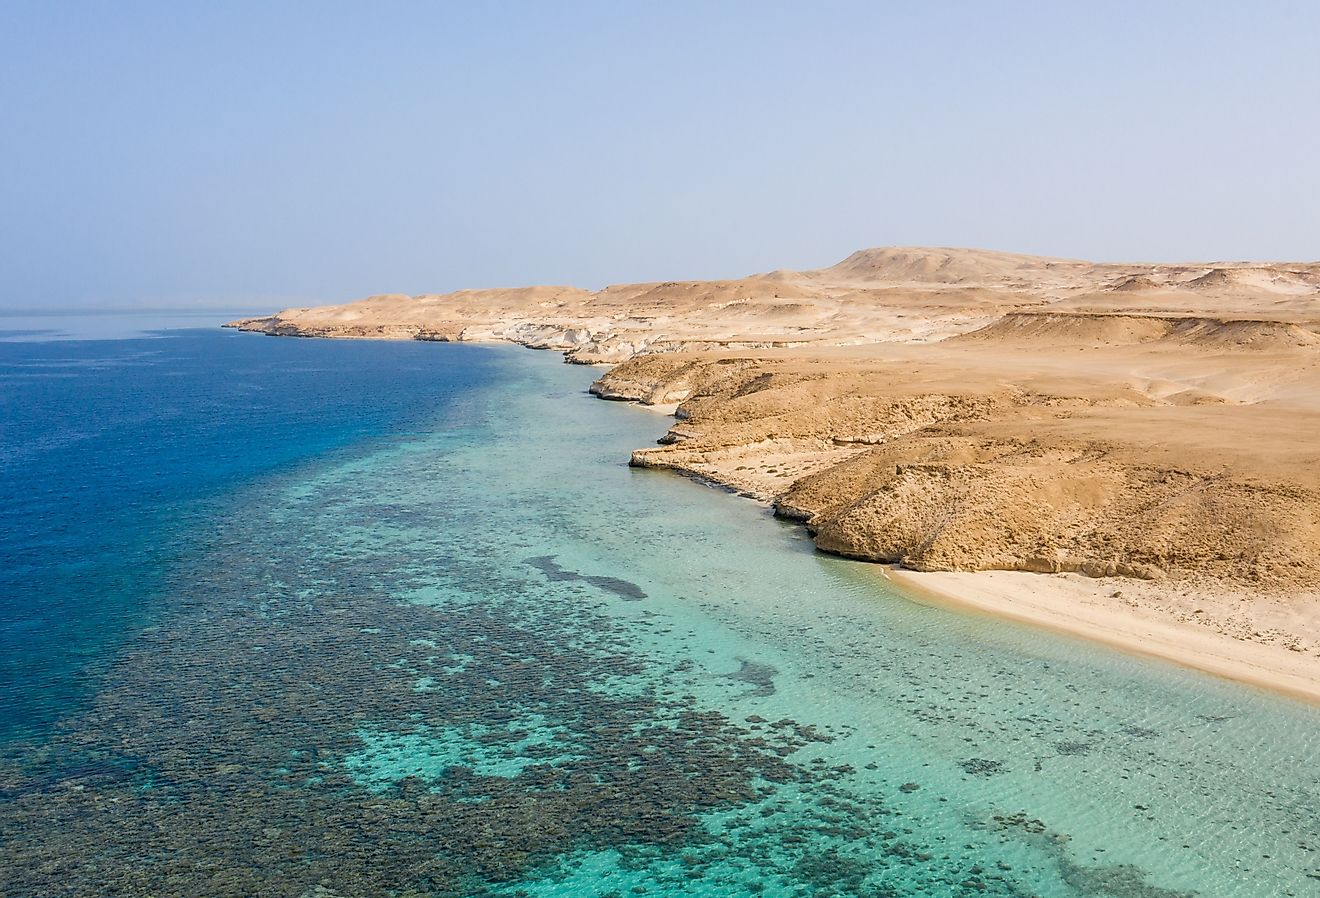 Aerial view Red Sea corals and sandy island, Egypt. Image credit Lostsurf via Shutterstock. 